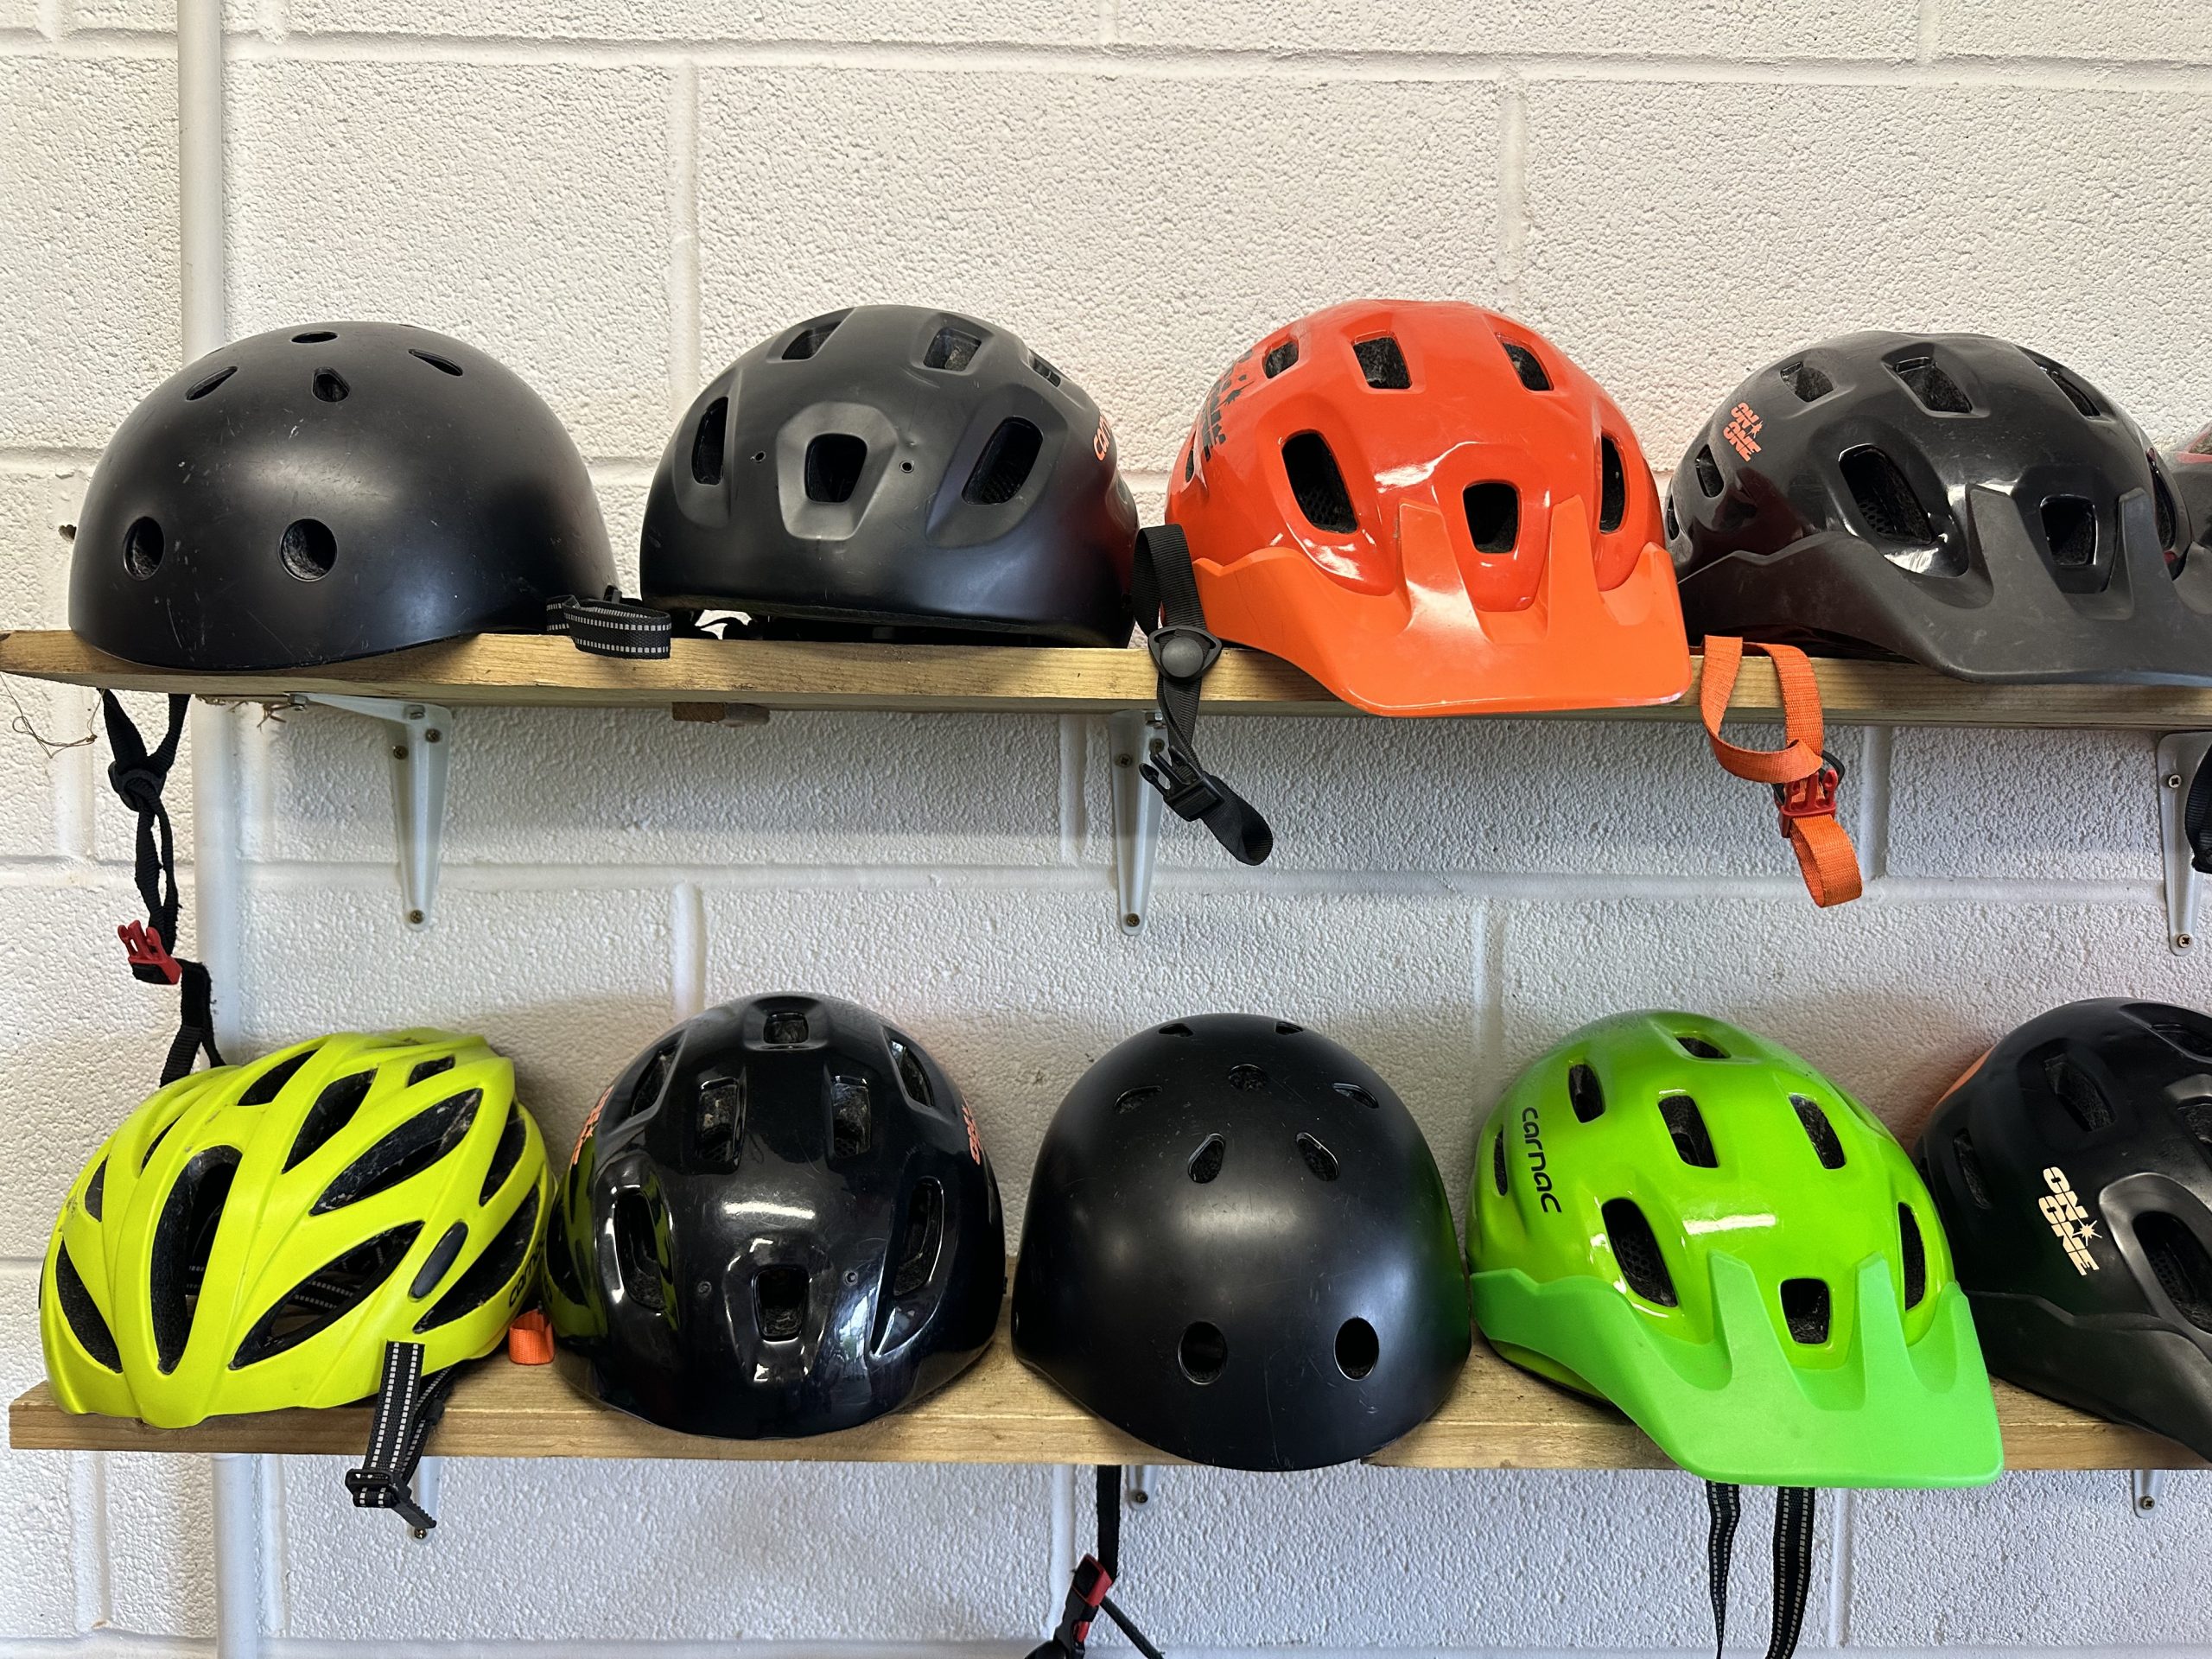 A row of bike helmets are lined up on two shelves. There are black, orange, green and yellow helmets.